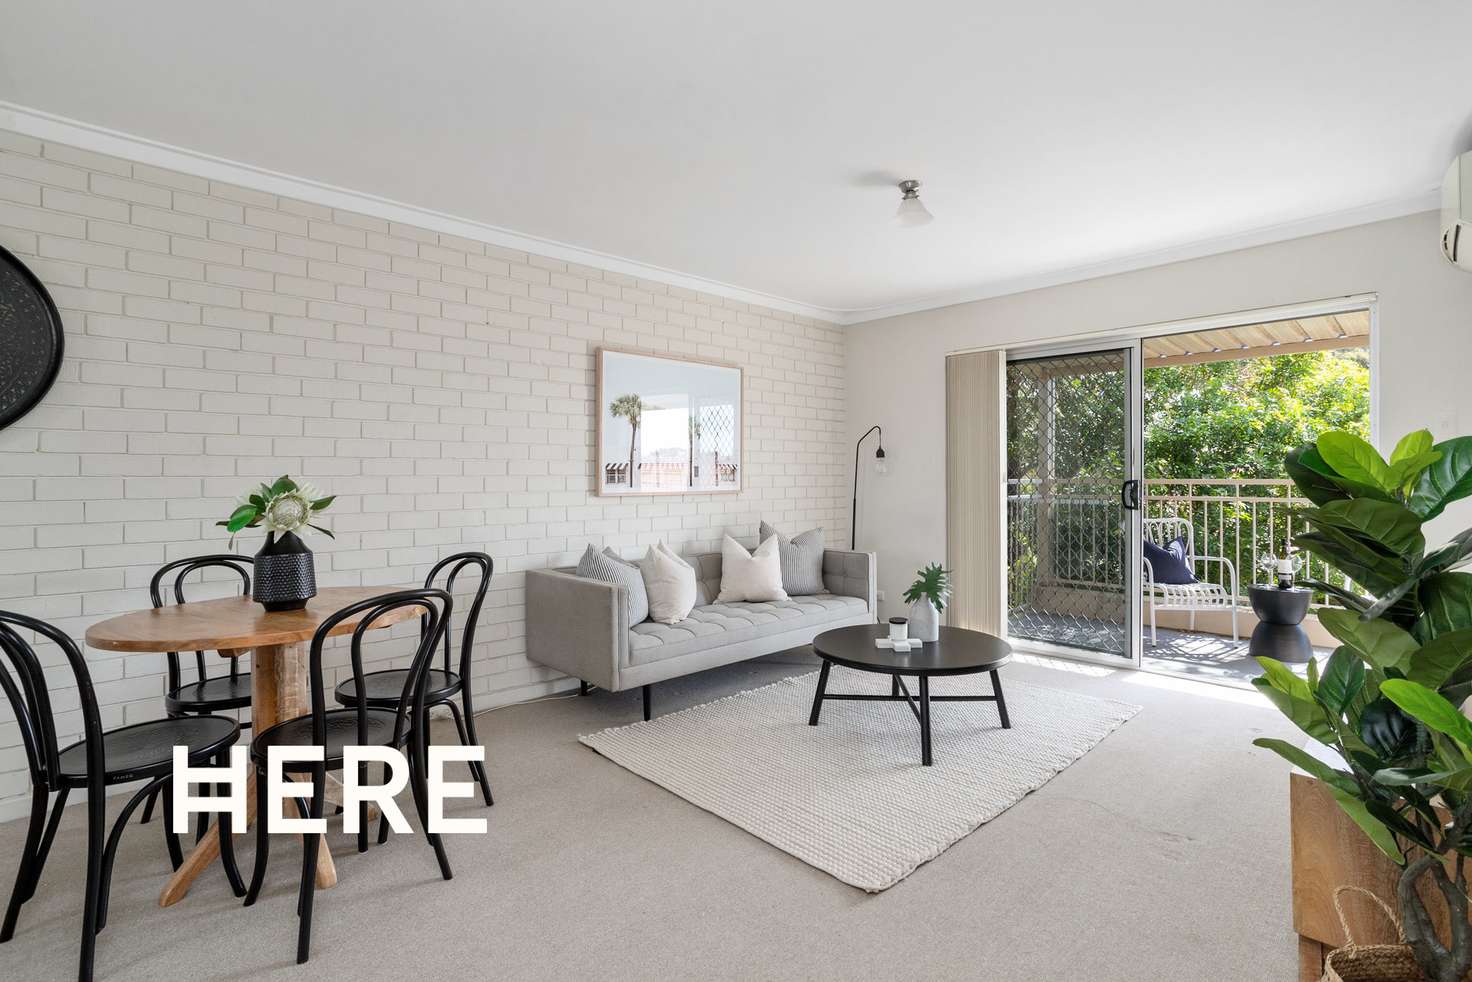 Main view of Homely apartment listing, 16/171 Hector Street, Osborne Park WA 6017